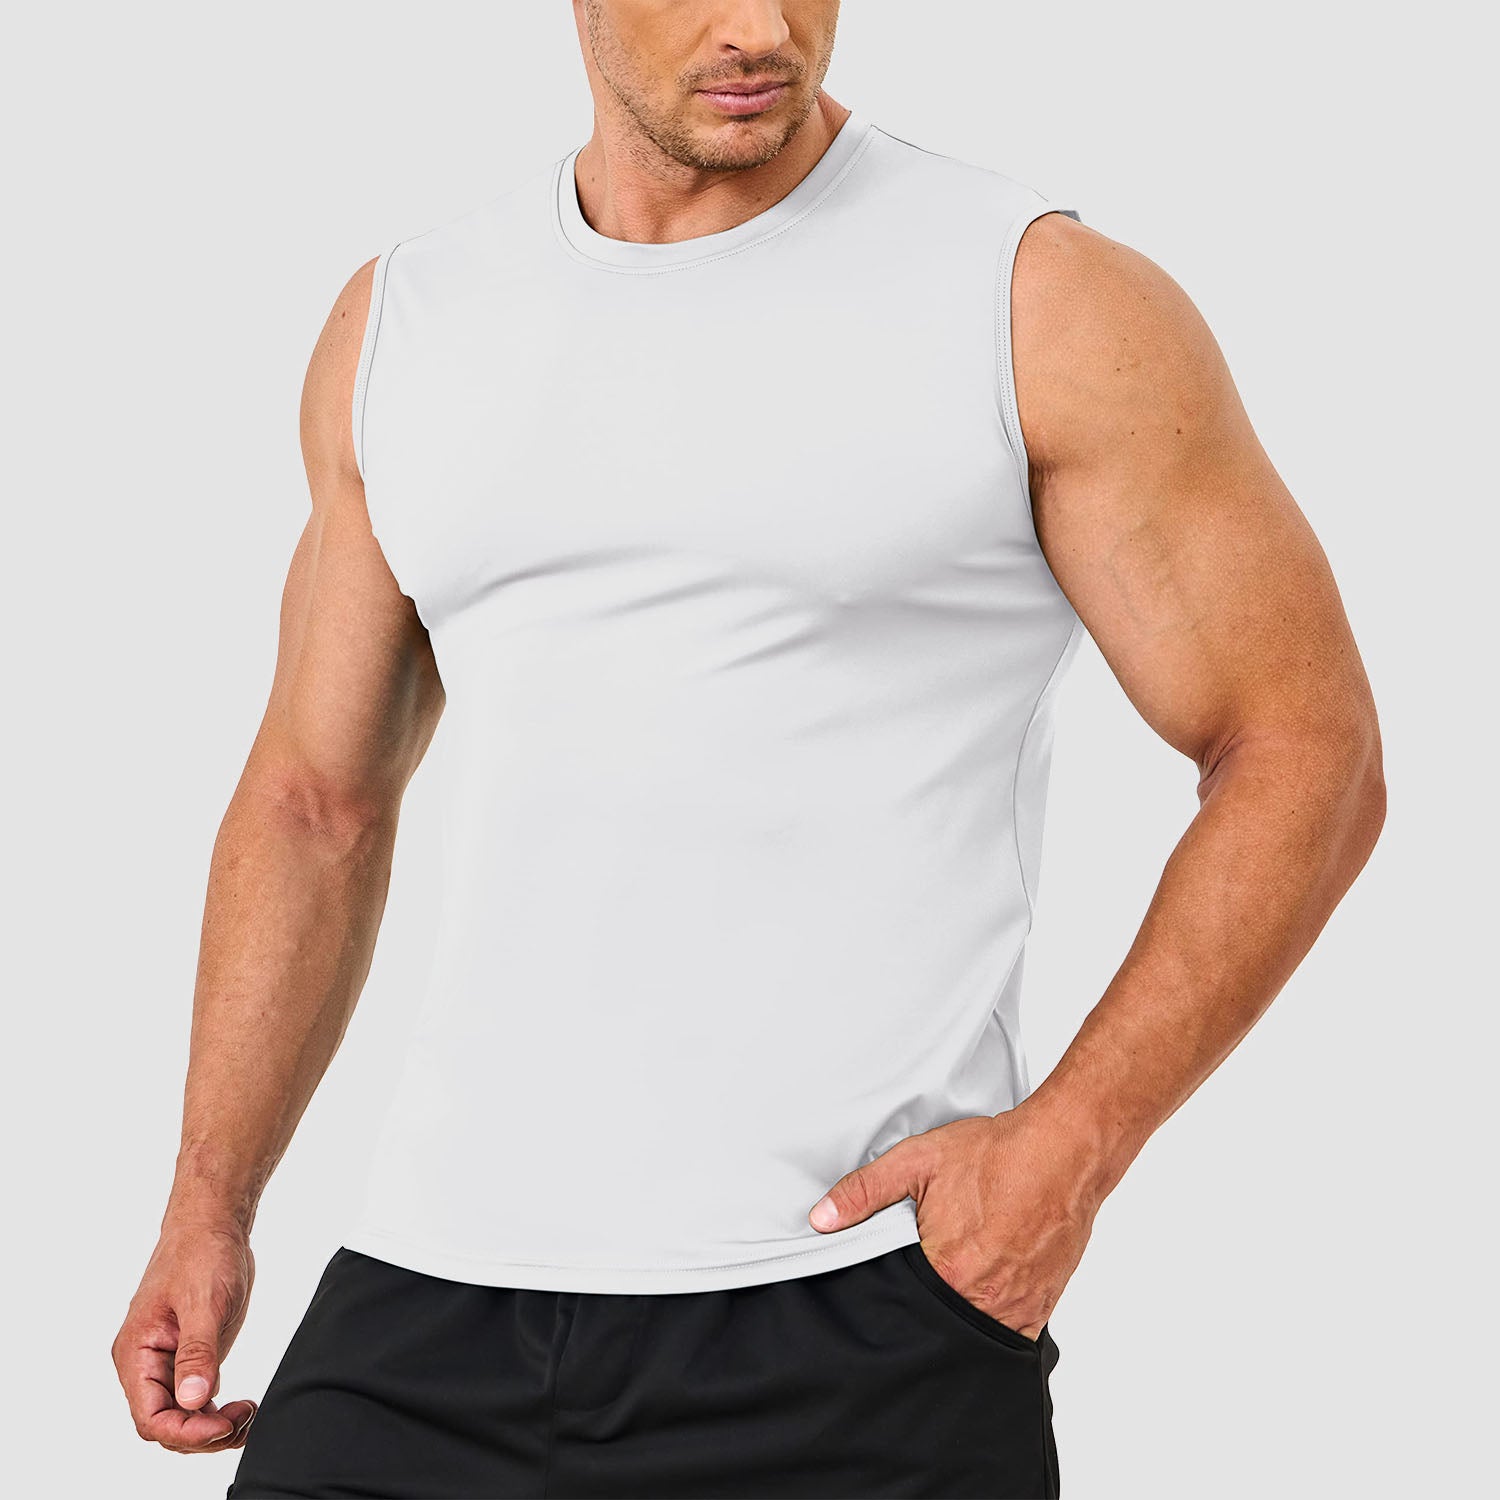 Men's Sleeveless Tank Tops UPF 80+ Sun Protection Quick Dry Workout Running Gym Muscle Undershirts